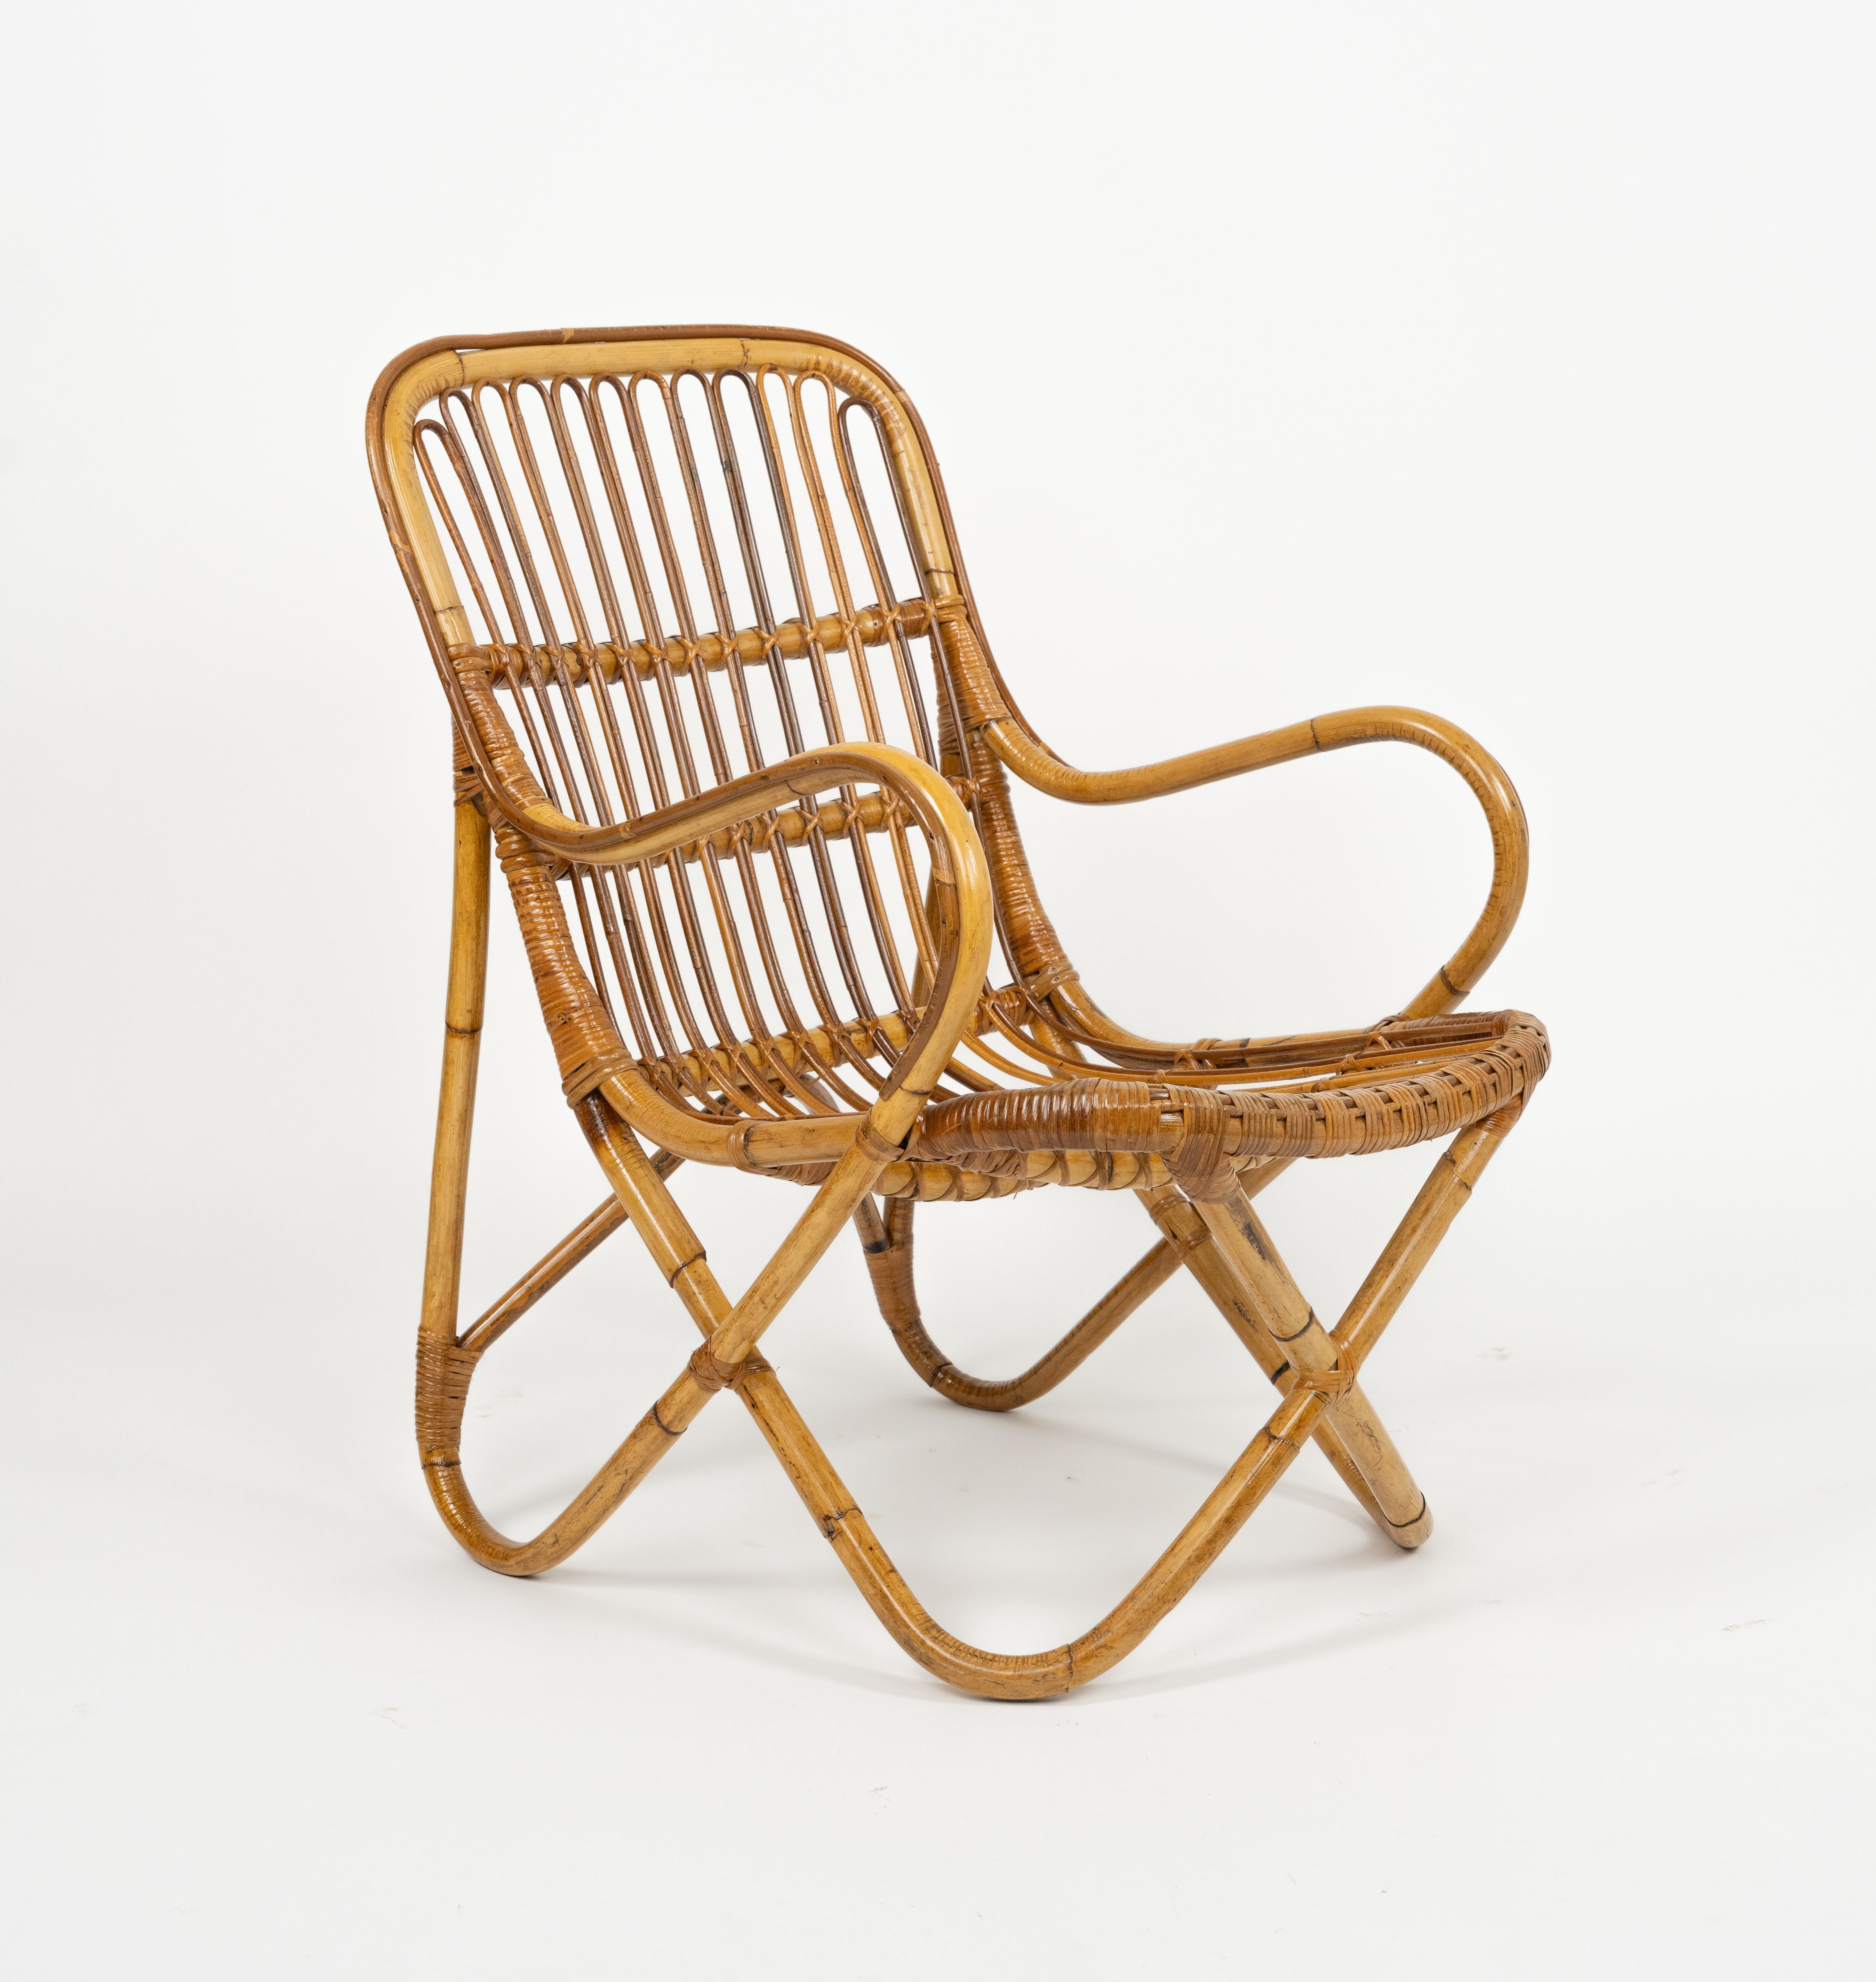 Midcentury Bamboo and Rattan Pair of Armchairs Tito Agnoli Style, Italy 1960s For Sale 1